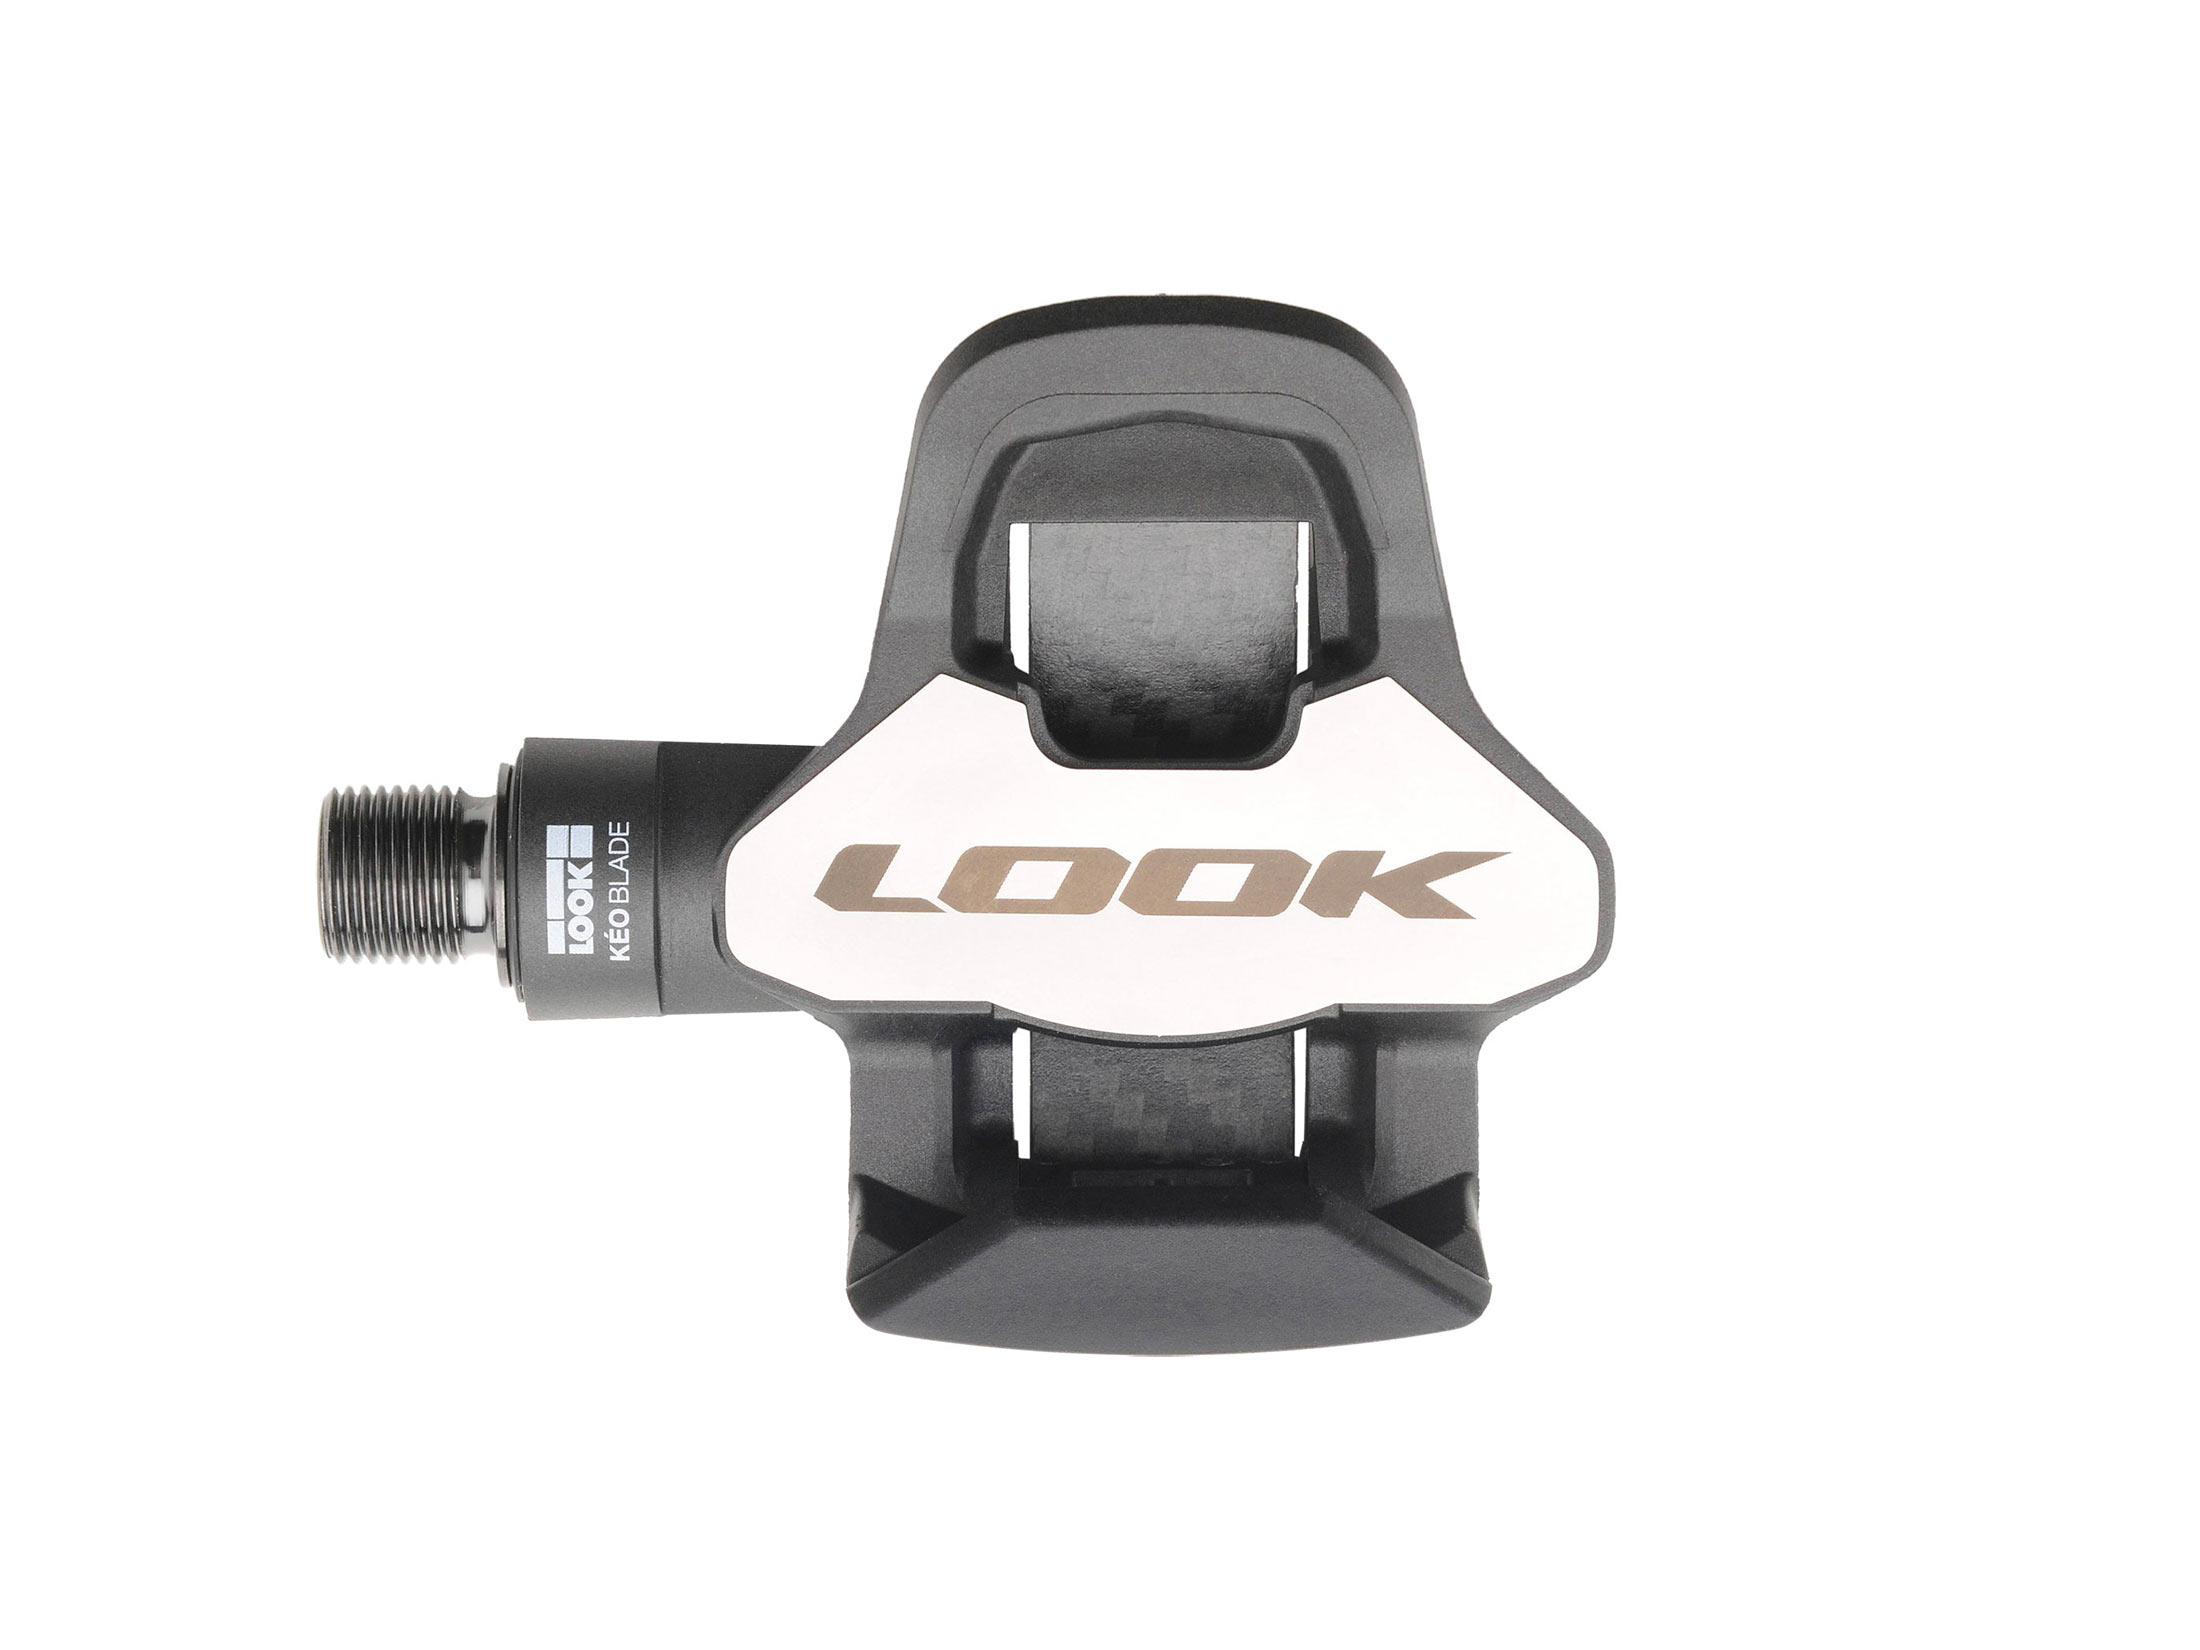 Look Kéo Blade 2 Ti Pedals